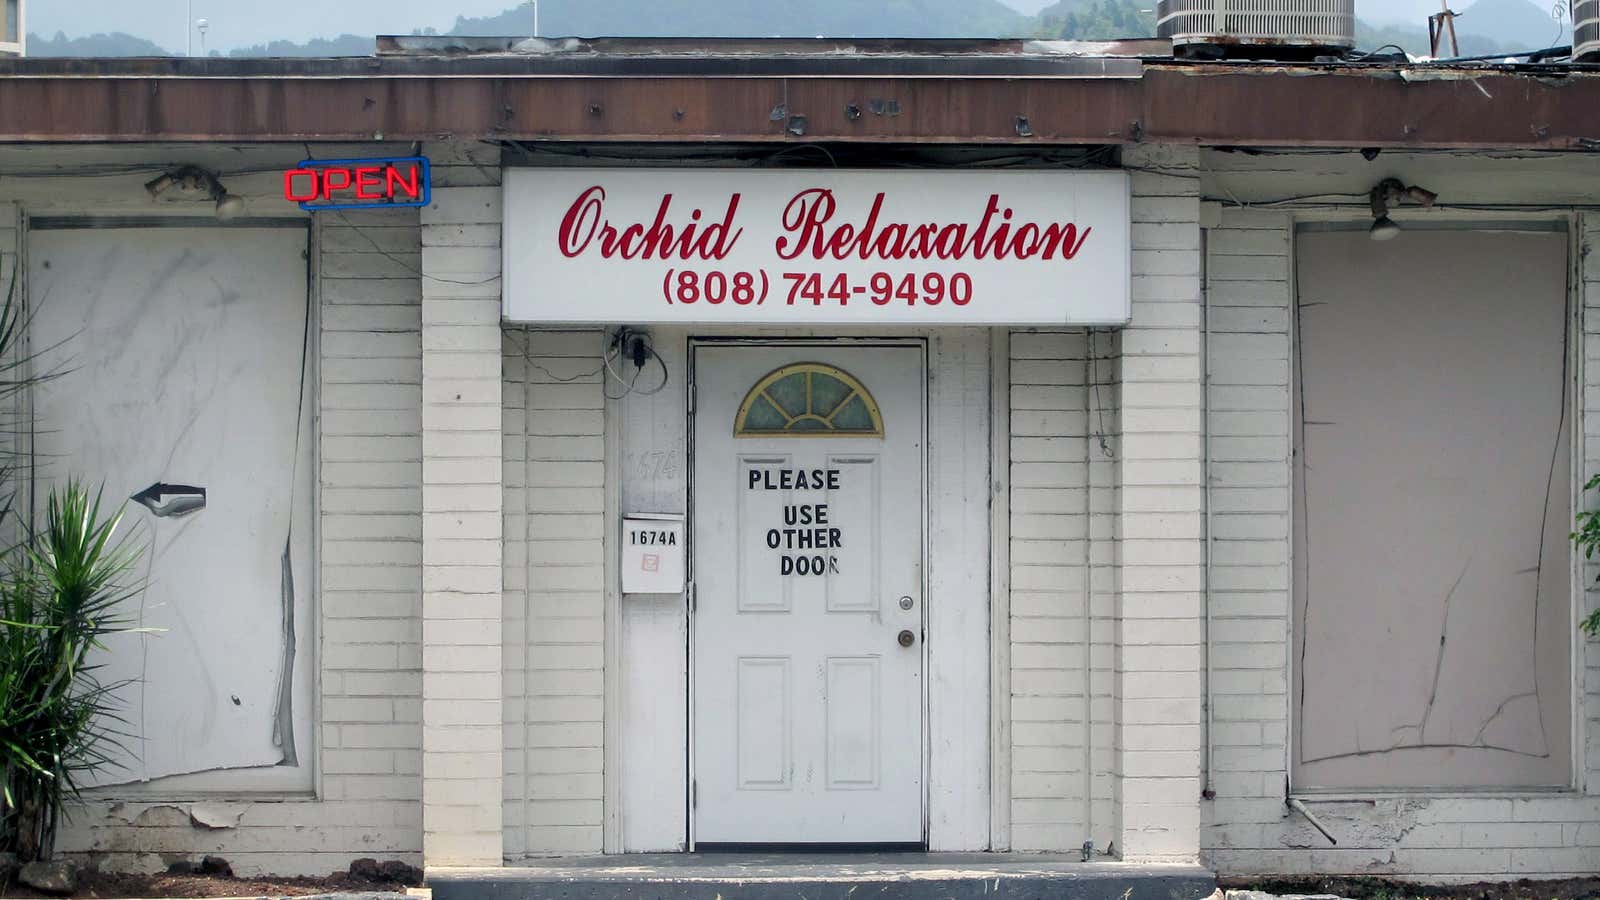 The $2.5 billion industry of human trafficking through massage parlors makes widespread use of shell companies.